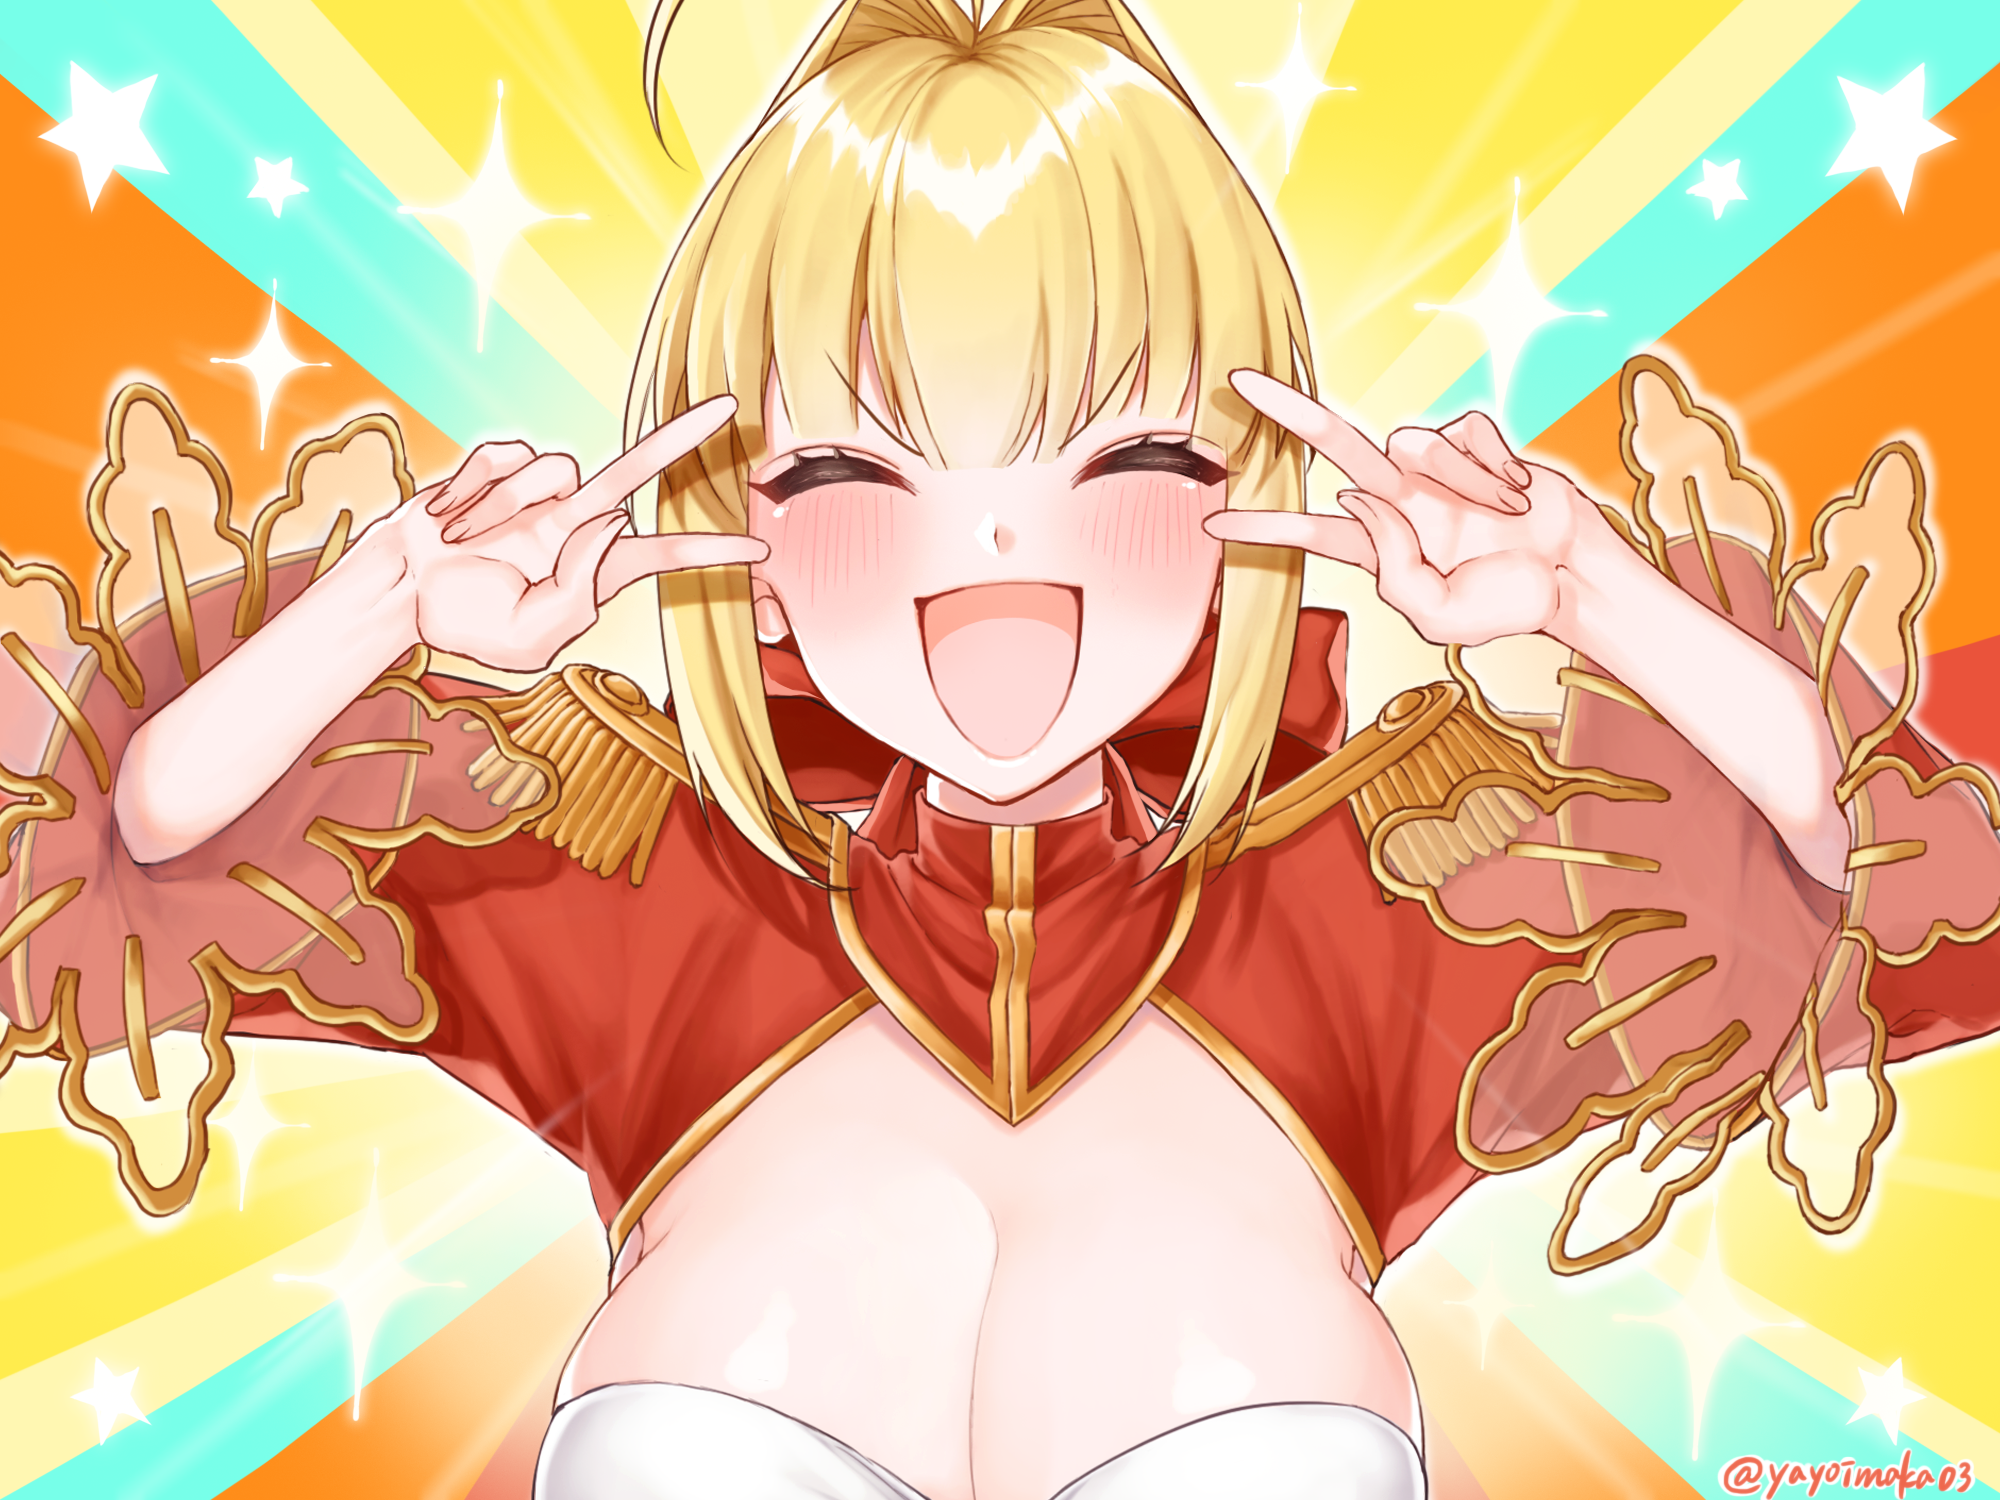 Anime 2000x1500 Yayoi Maka (Artist) boobs cleavage blonde Fate series anime big boobs curvy huge breasts closed eyes open mouth face anime girls hand gesture victory sign